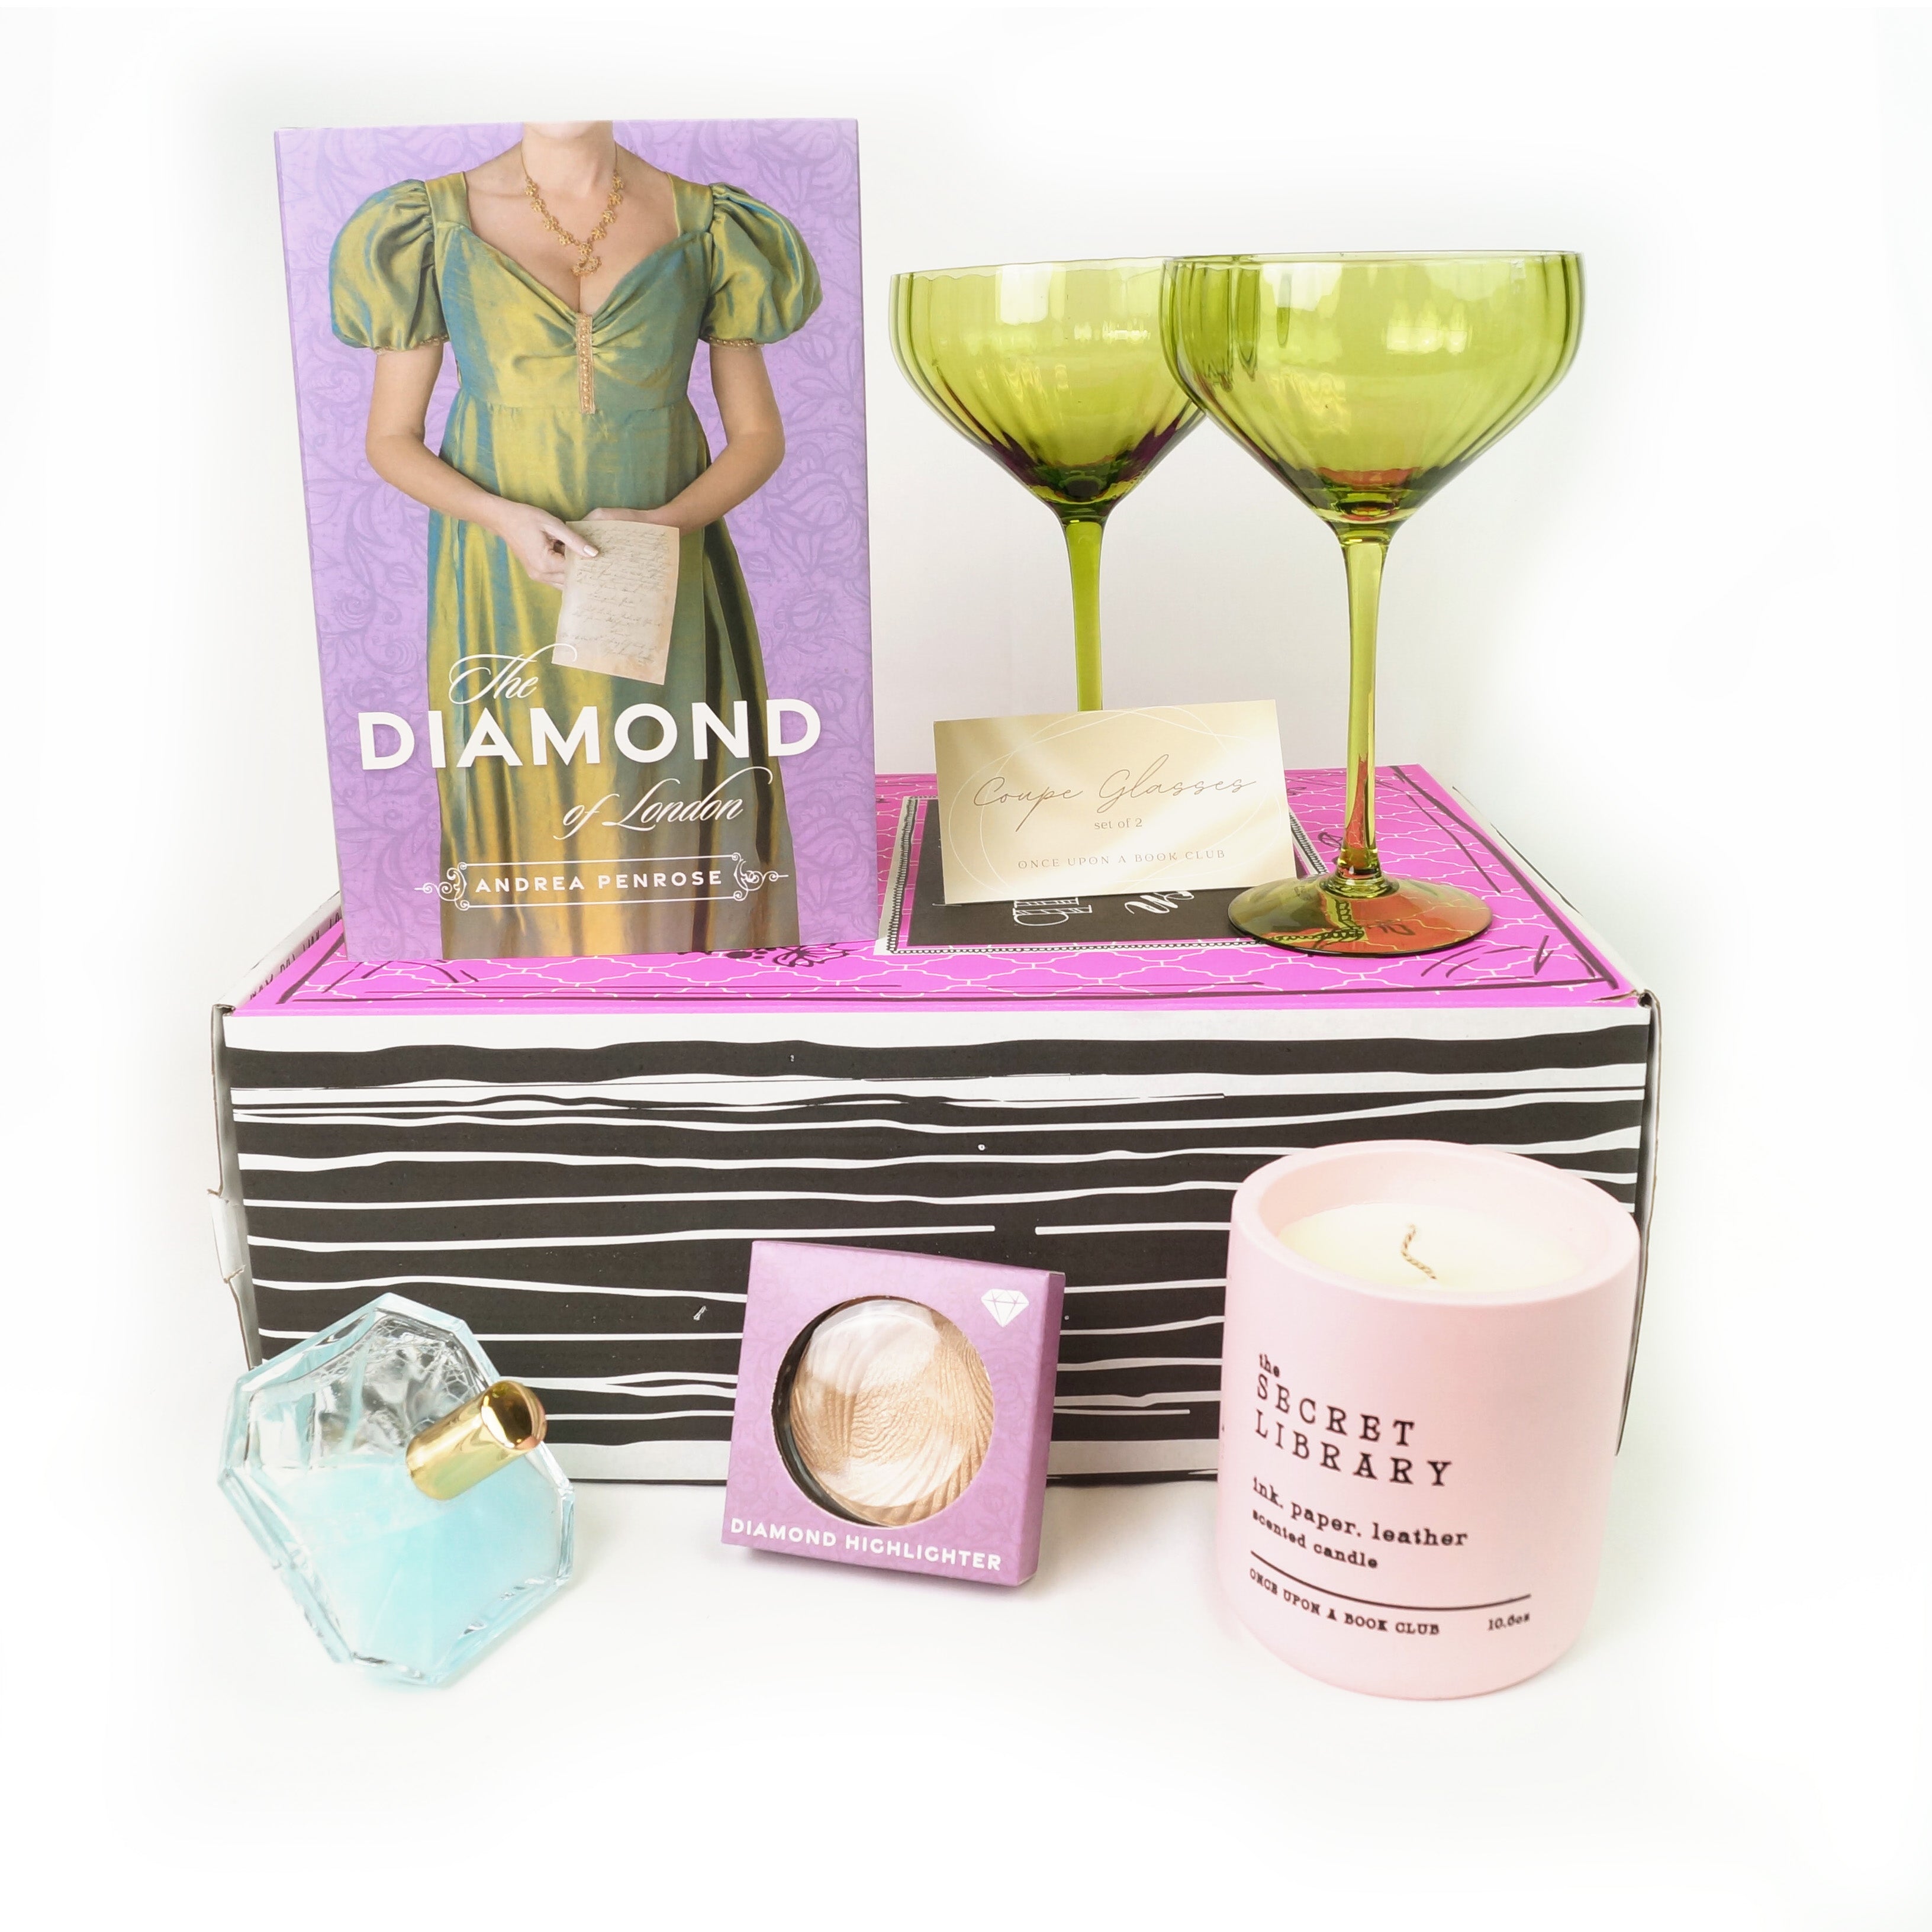 A hardcover special edition of The Diamond of London stands on a pink OUABC box next to a pair of green coupe glasses. In front of the box are a diamond-shaped glass container with light blue liquid, highlighter, and a pink candle labeled The Secret Library.